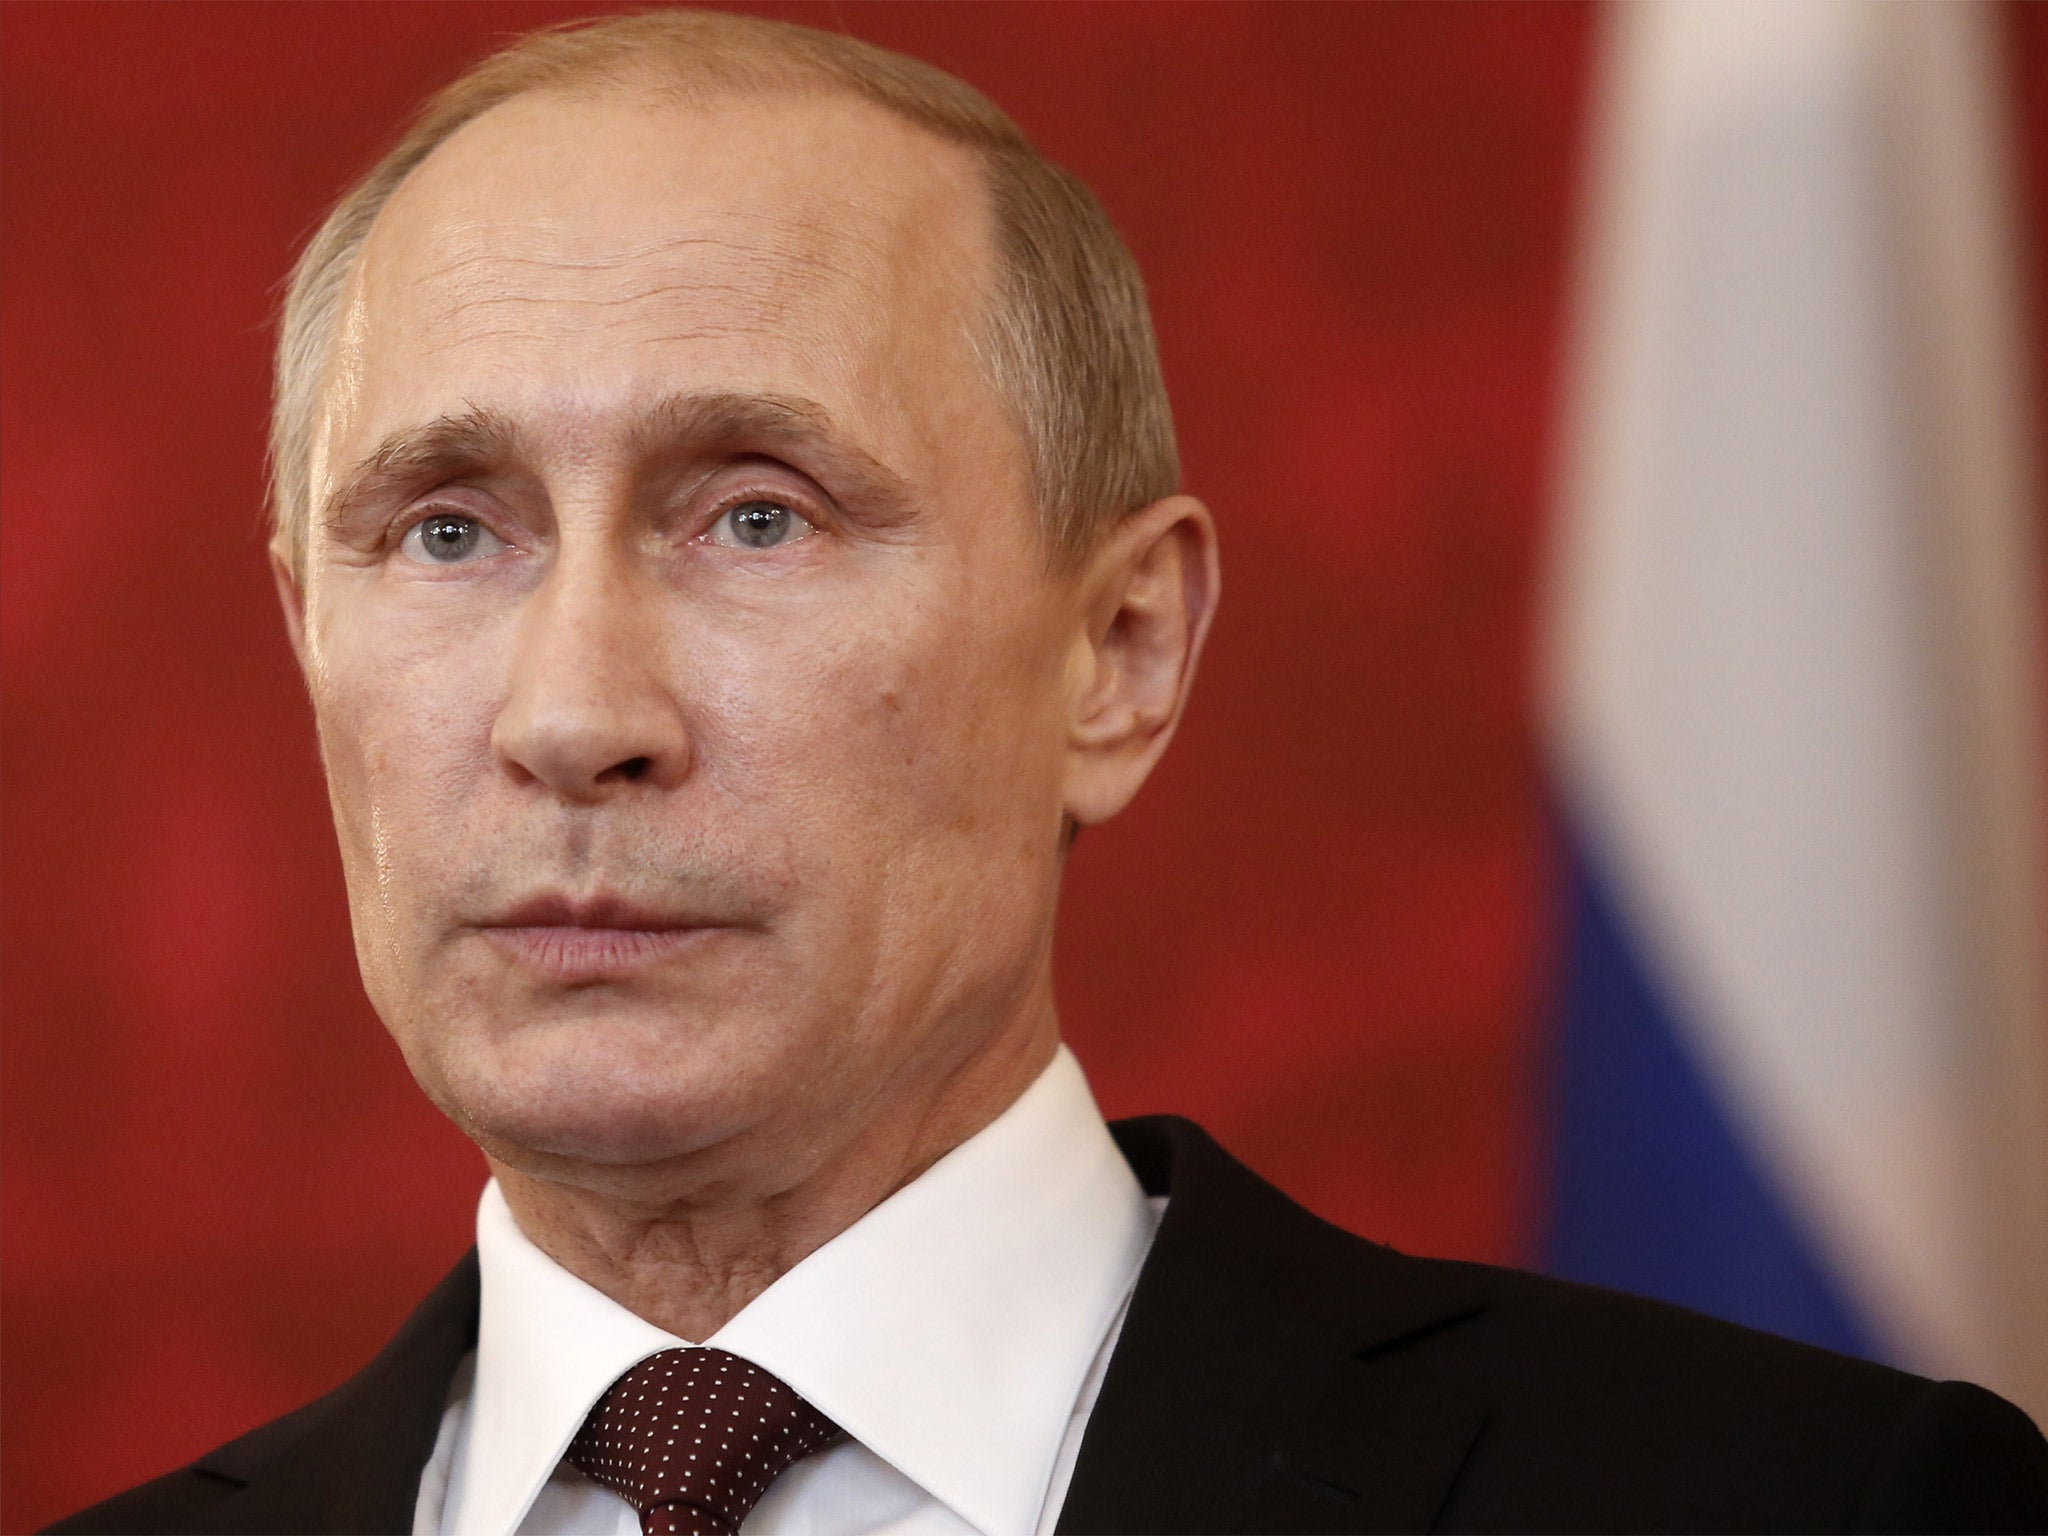 Vladimir Putin's decision will be welcomed by the West